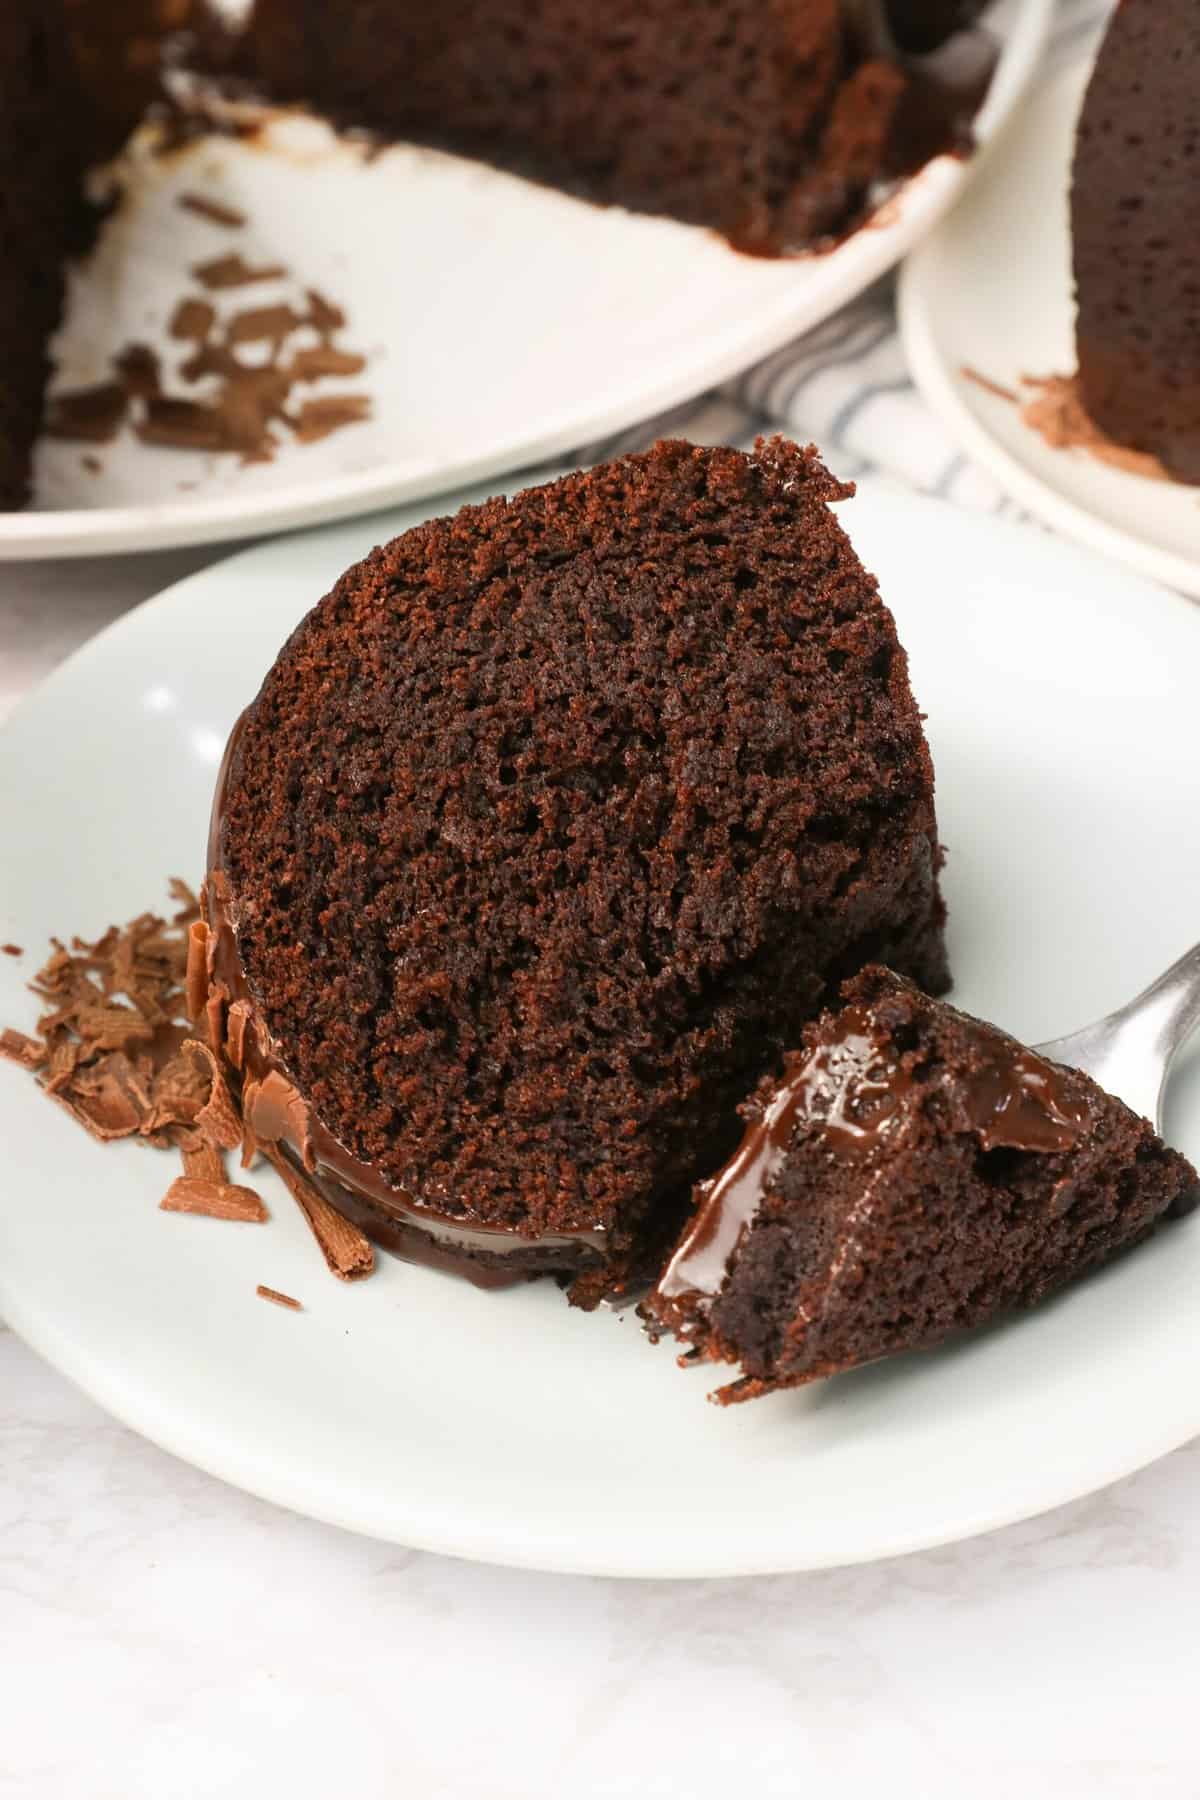 Getting ready to take a delicious bite of chocolate bundt cake for the ultimate comfort food